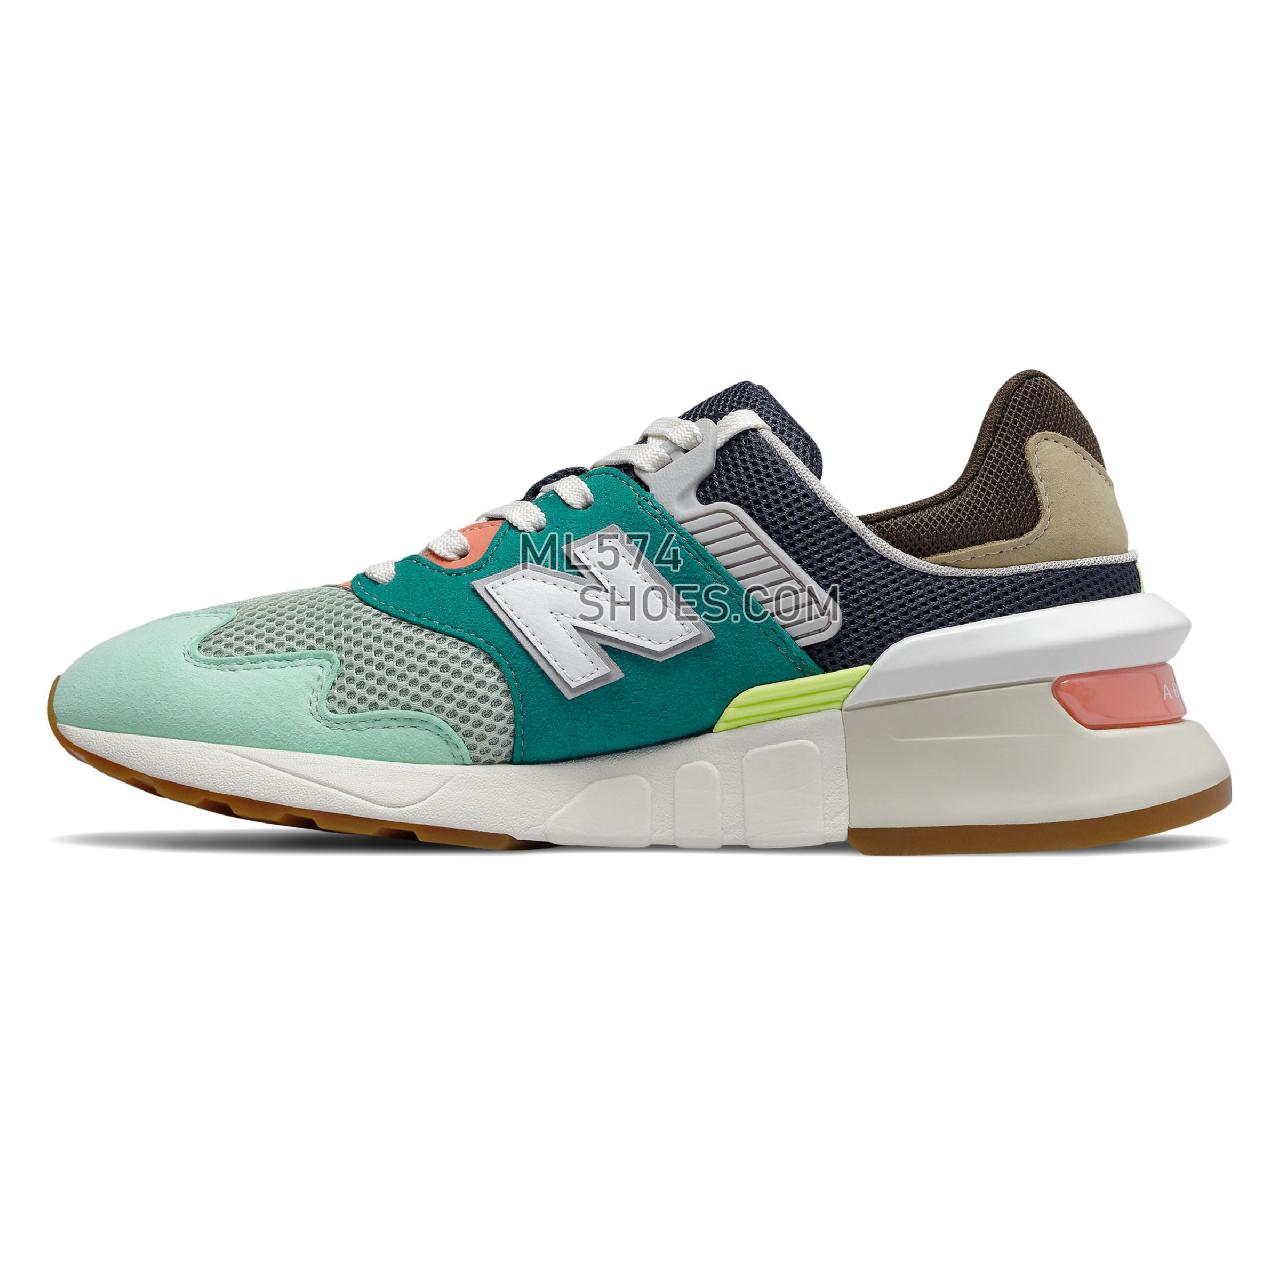 New Balance 997 Sport - Men's Sport Style Sneakers - Team Teal with Neo Mint - MS997JHY